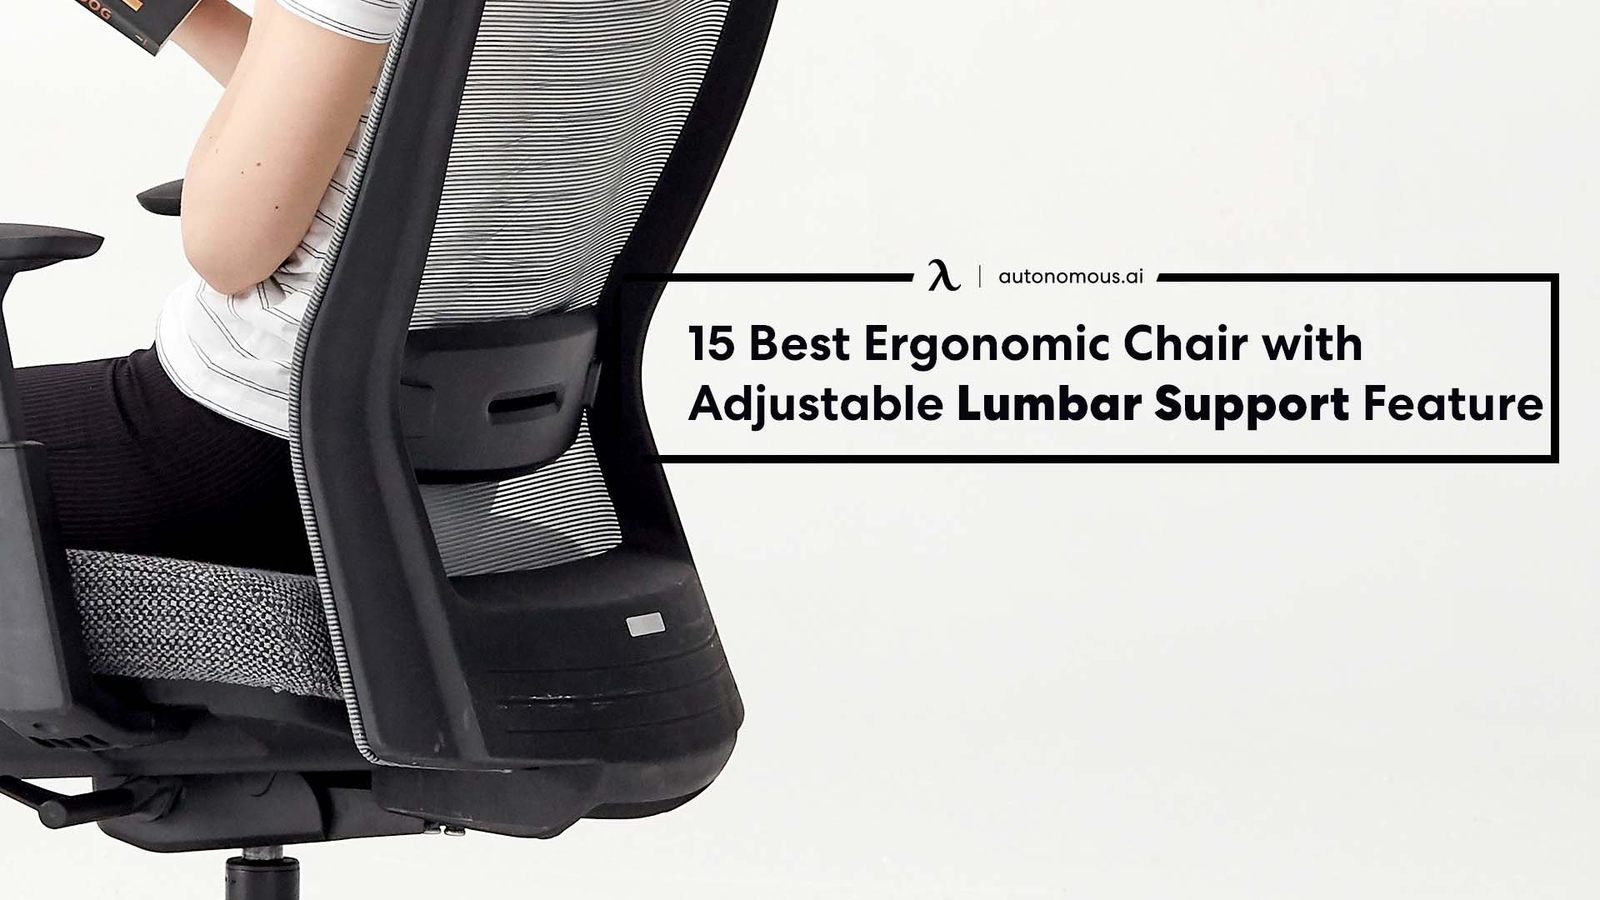 15 Best Ergonomic Chair With Adjustable Lumbar Support Feature